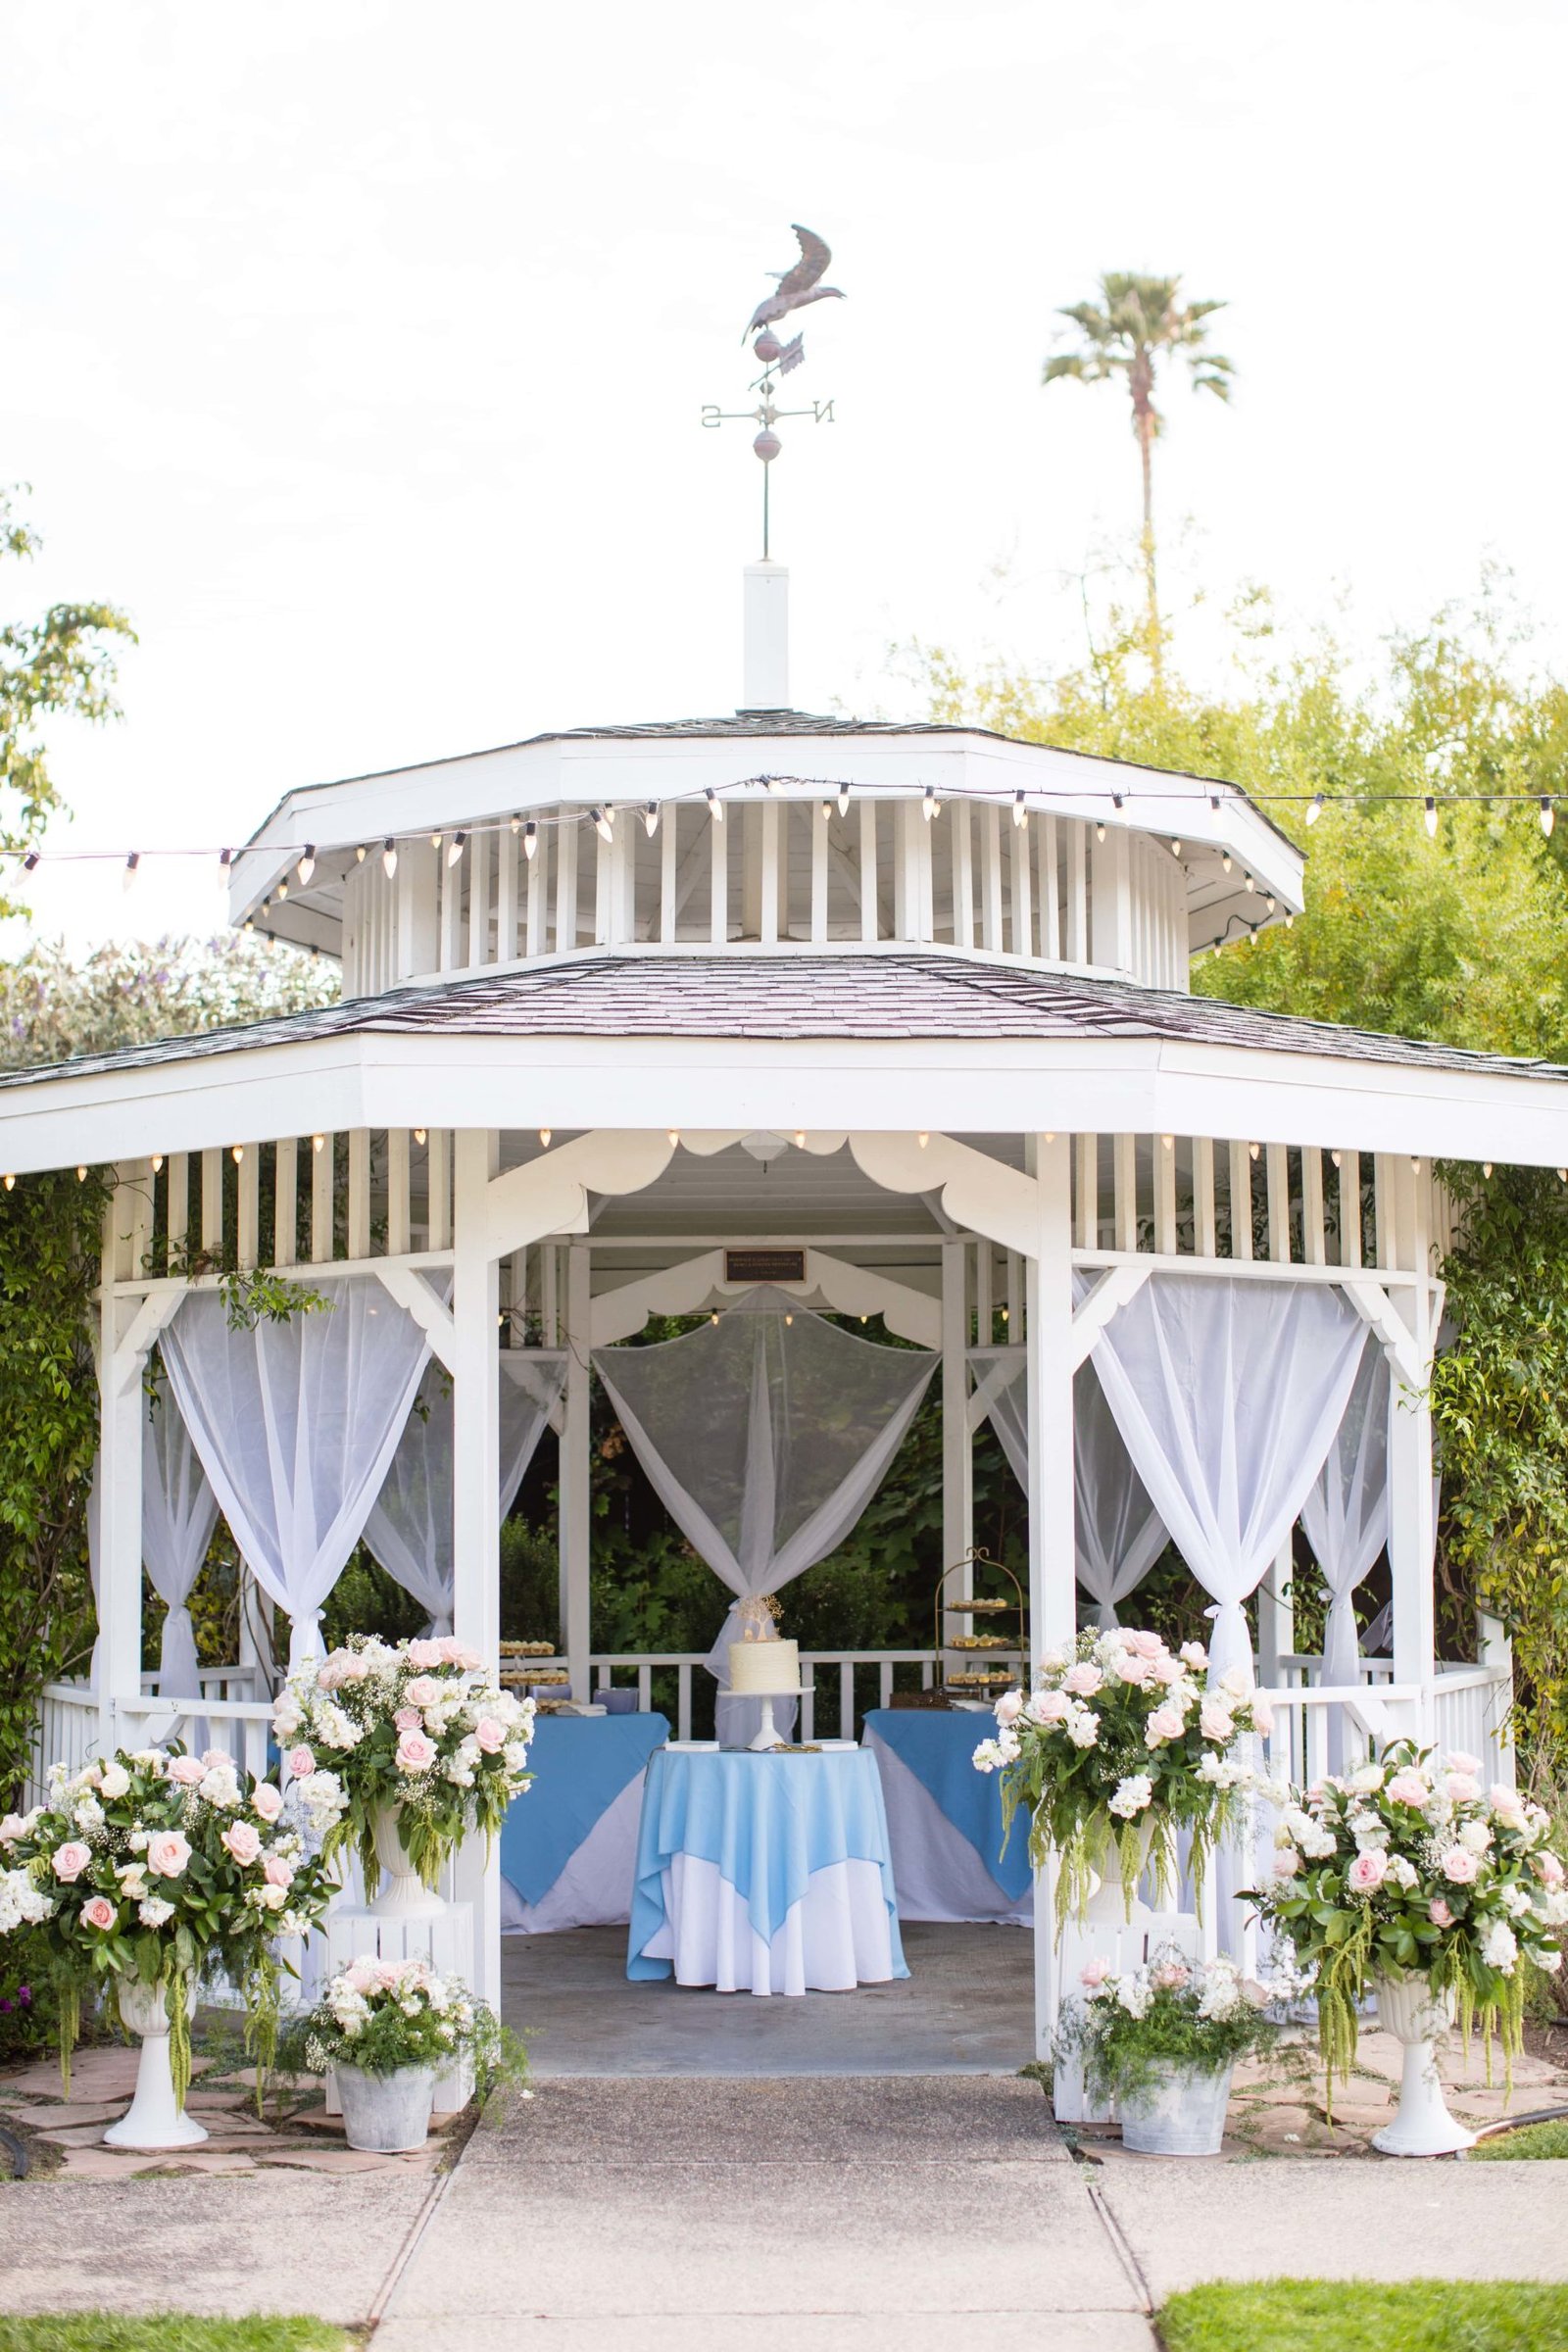 Gazebo decorated for the wedding cake at Heritage House in Arroyo Grande